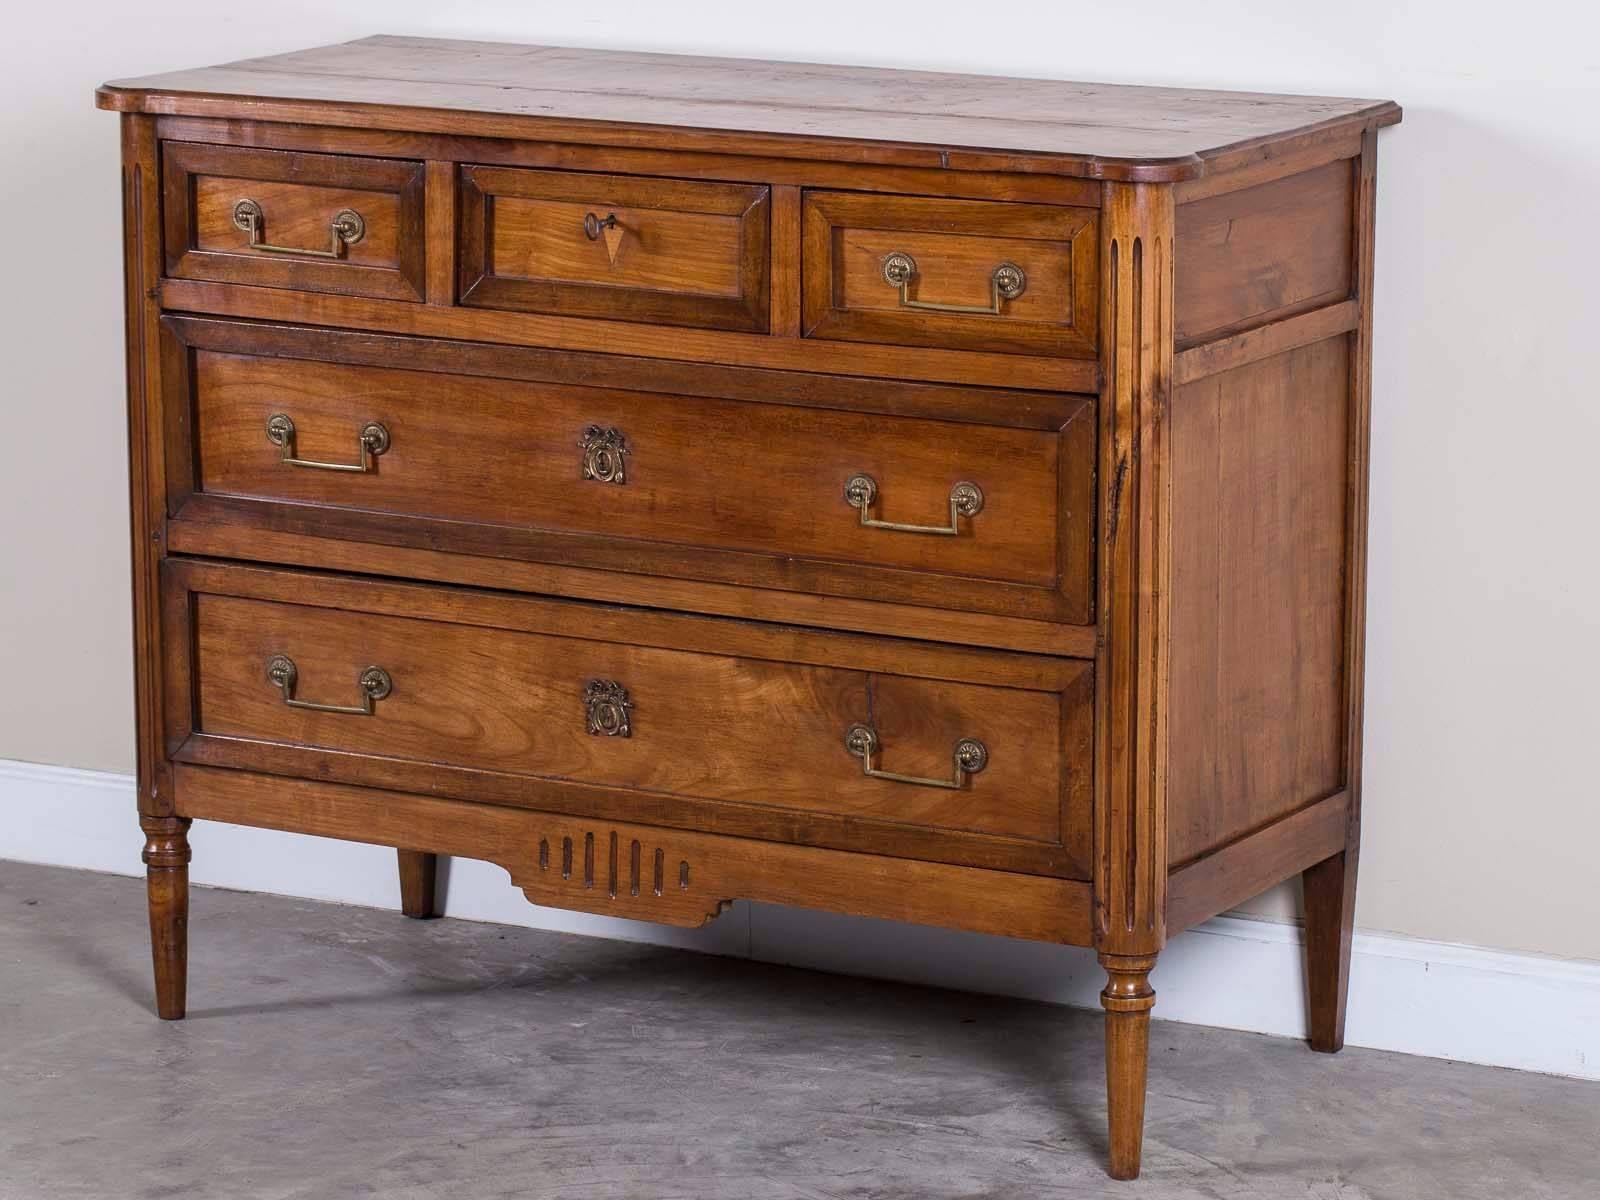 Hand-Carved Antique French Louis XVI Walnut Chest of Drawers, circa 1790